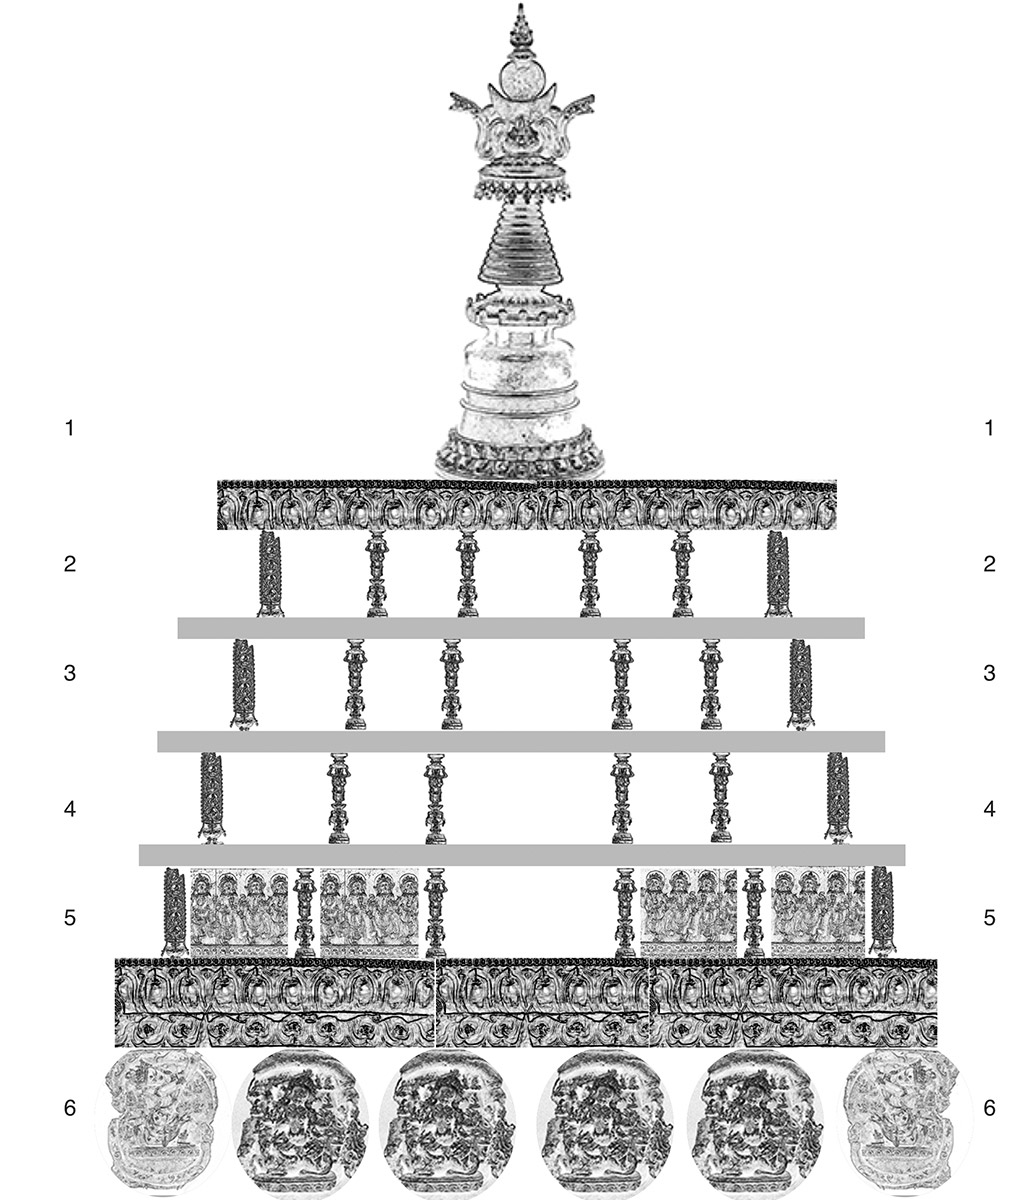 Schematic diagram composed of photo collage of stupa components; tiers numbered 1-6 from top-bottom